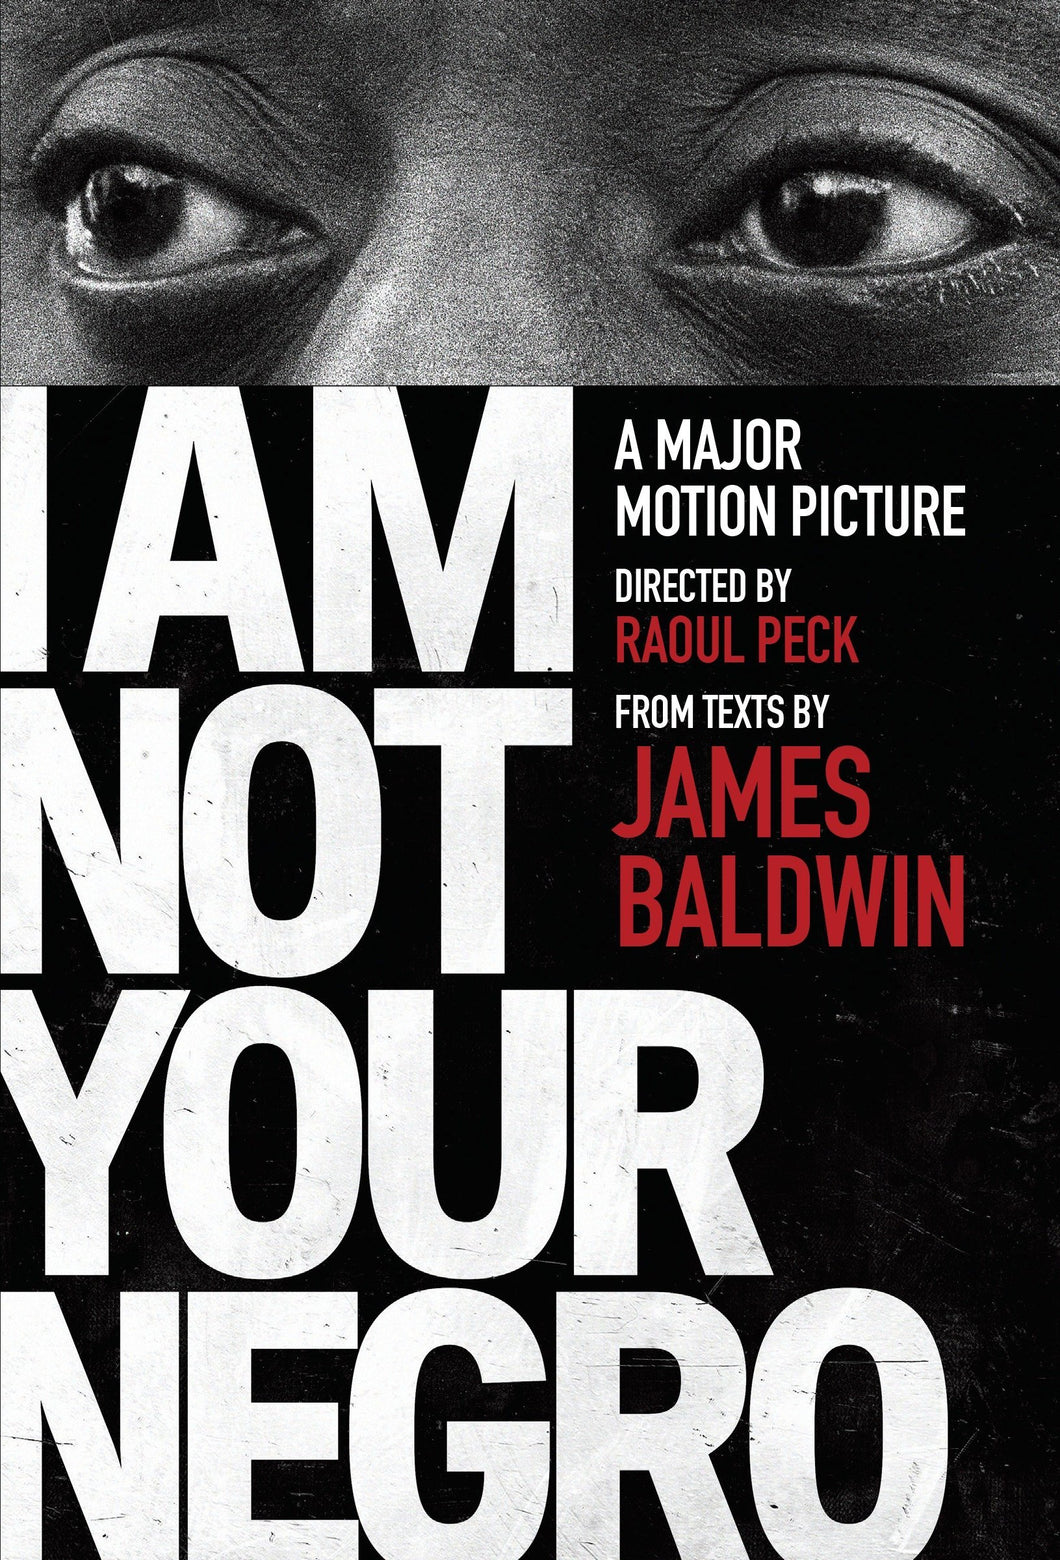 I Am Not Your Negro by James Baldwin